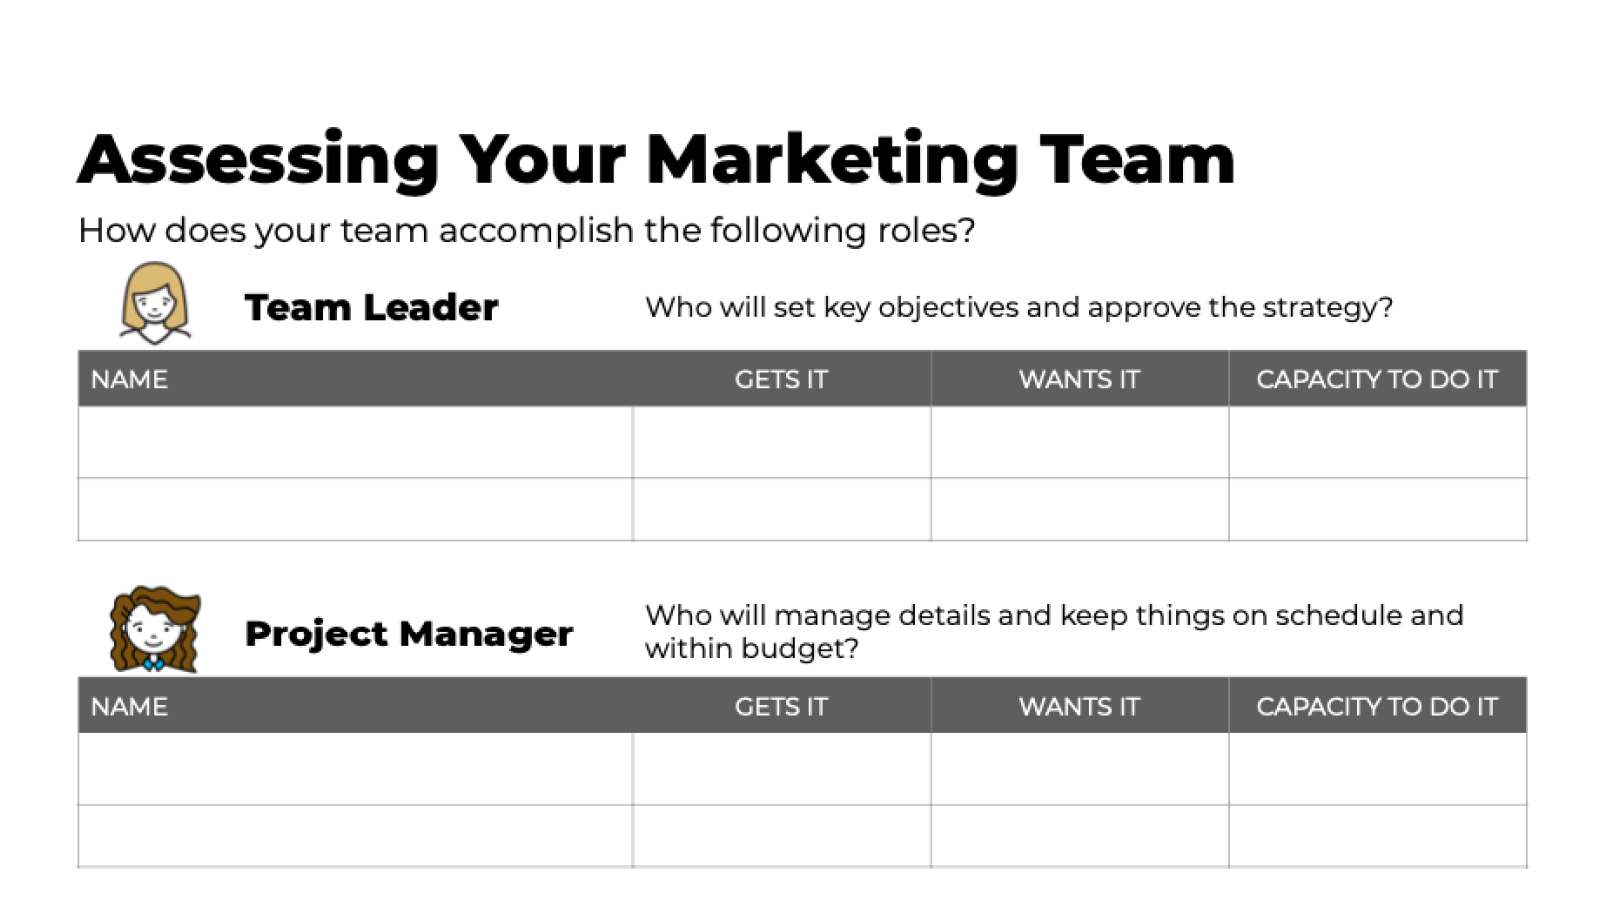 "Assessing Your Marketing Team" offers an analysis of six crucial roles within a marketing team, allowing you to identify the ideal candidate for each position and create a high-performing and well-balanced team.